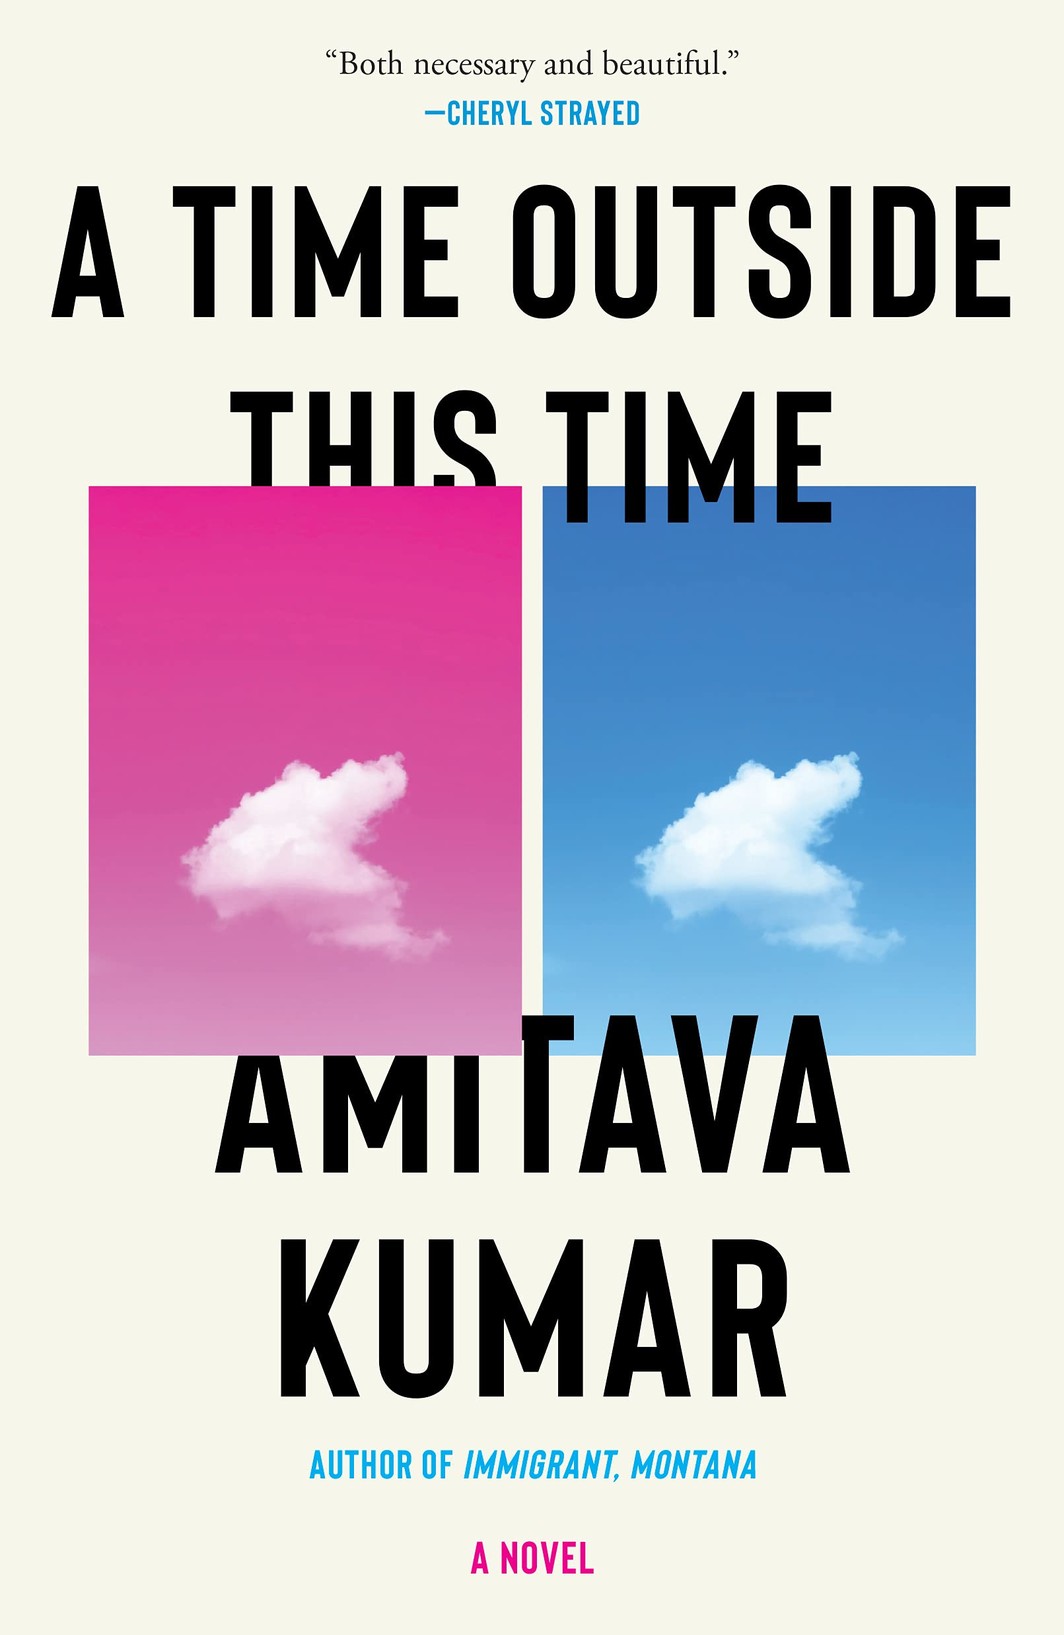 The cover of A Time Outside This Time